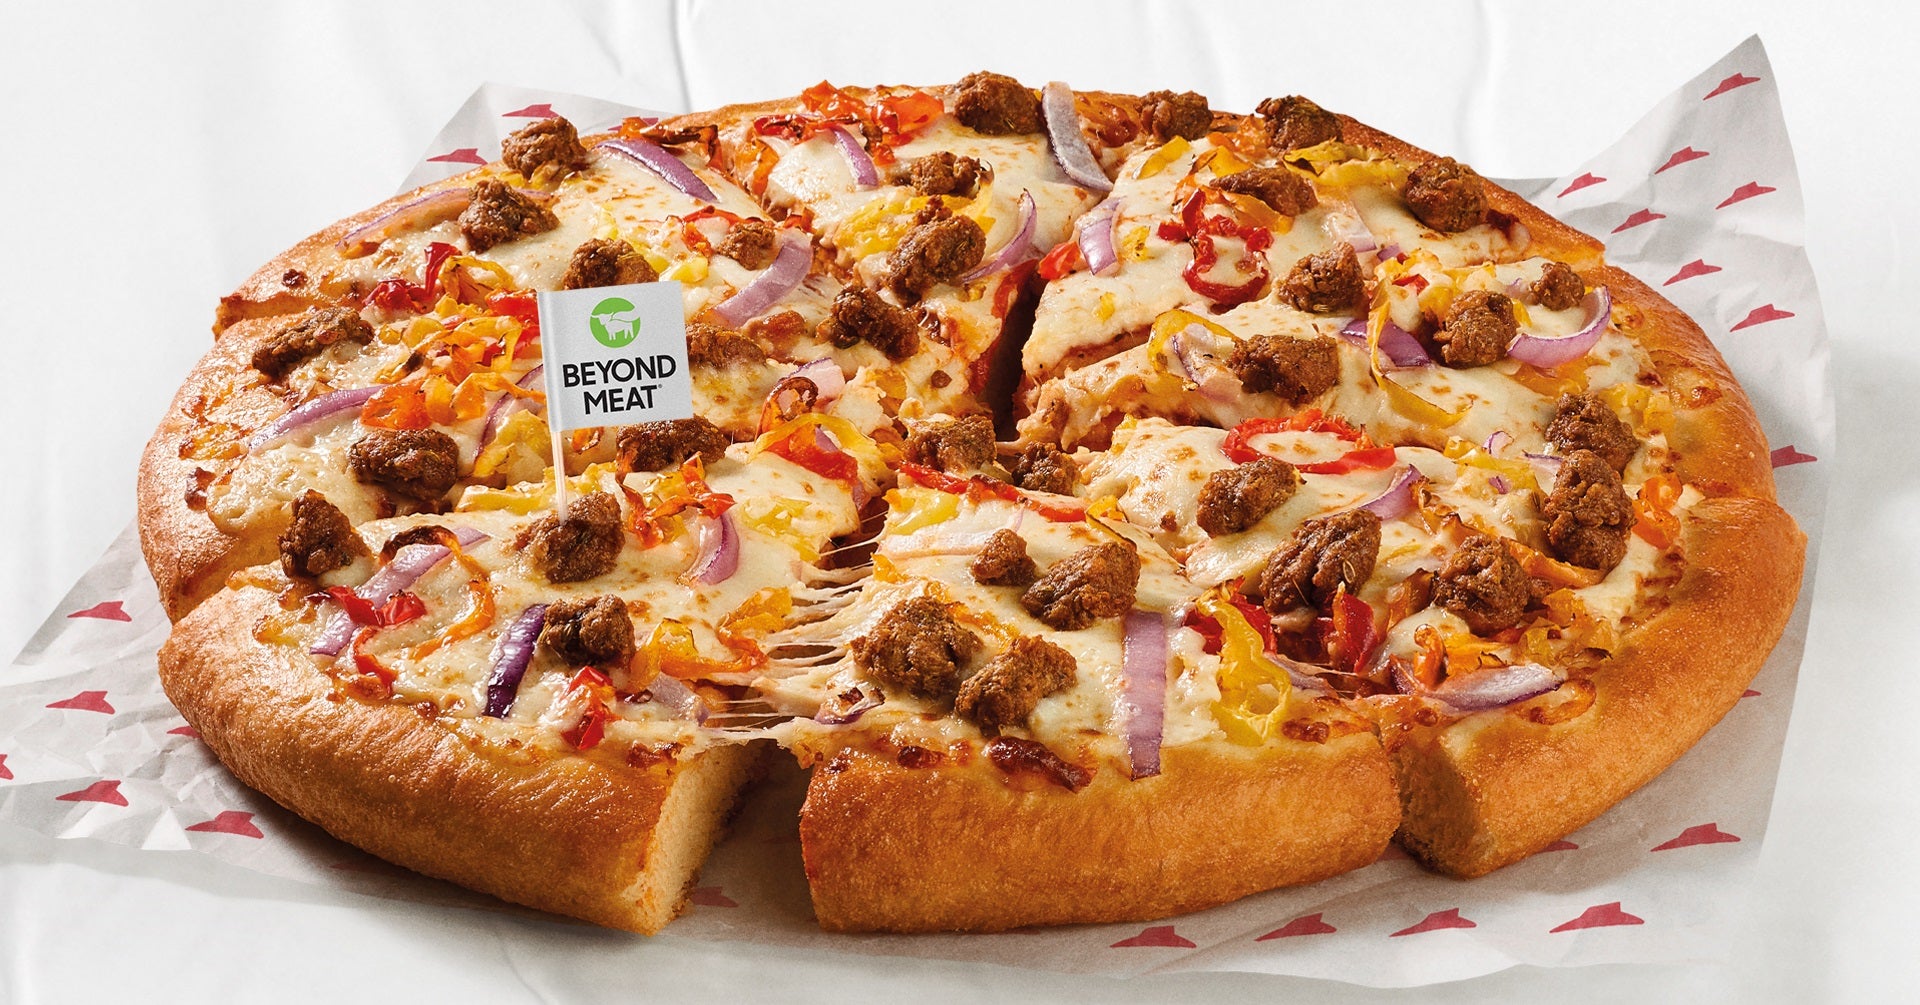 Pizza Hut Canada; Beyond Meat